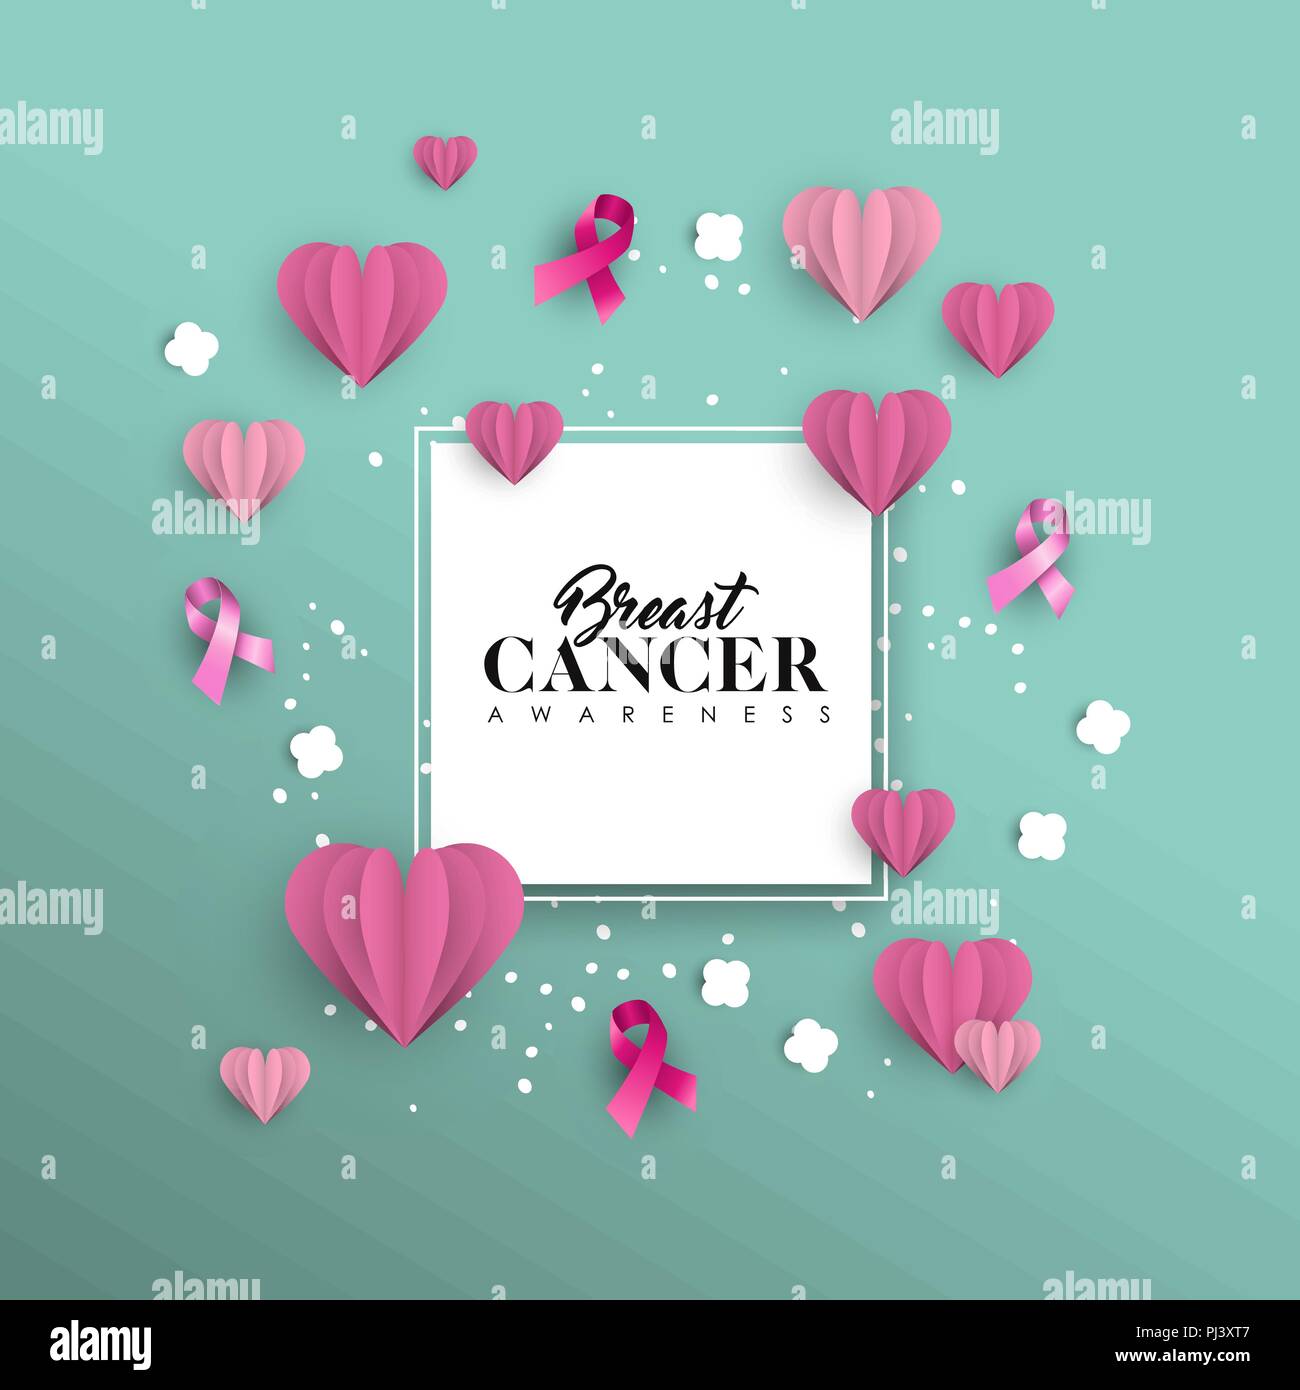 Breast cancer awareness quote t-shirt design template vector